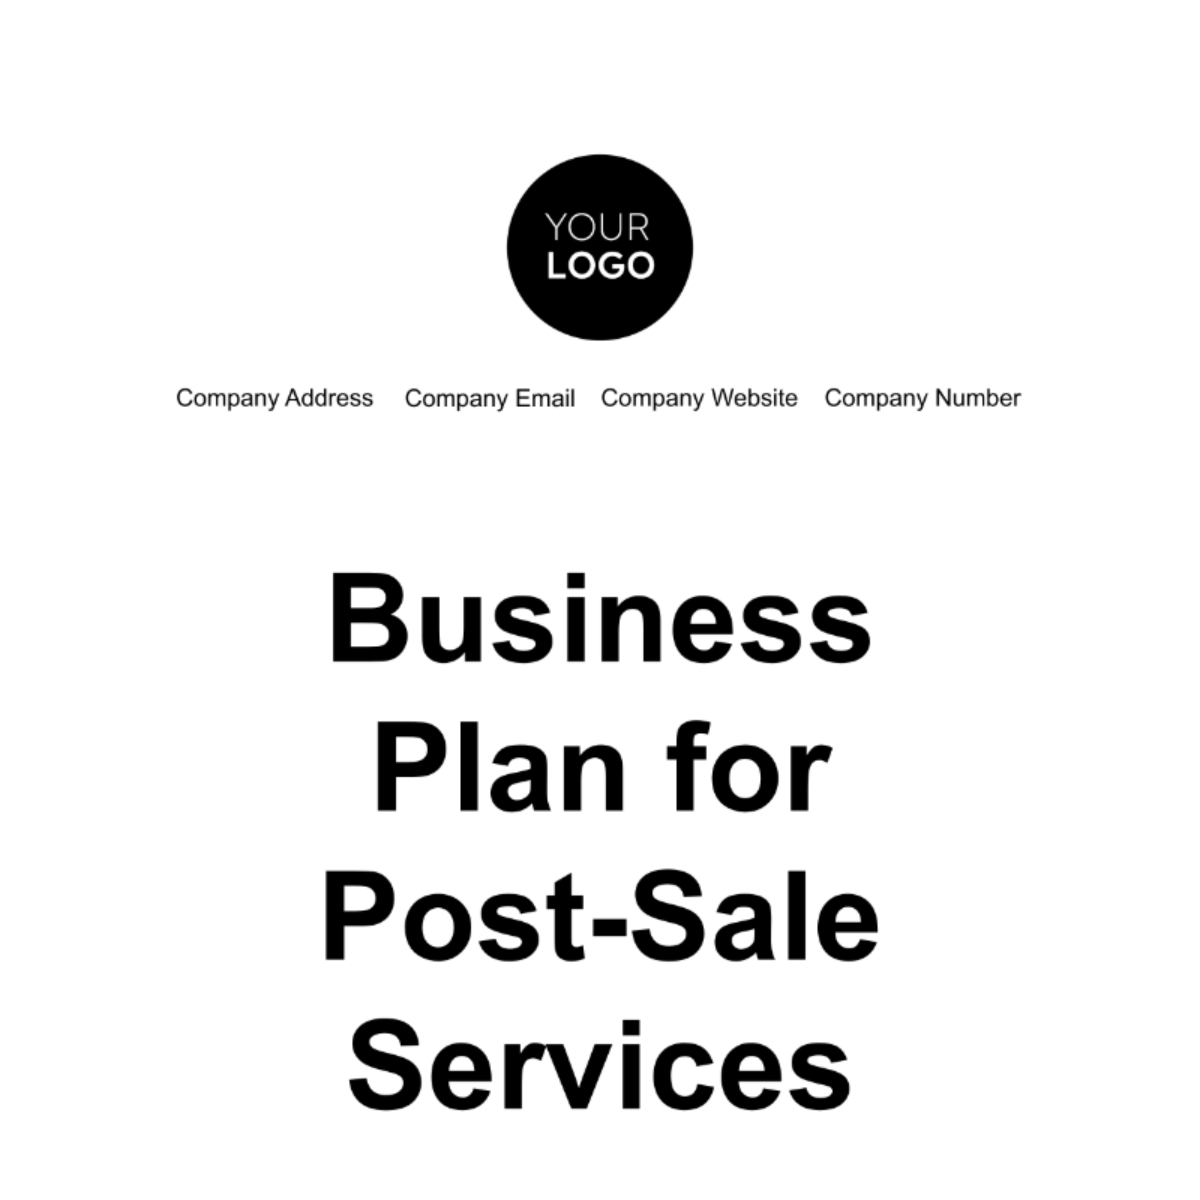 Free Business Plan for Post-Sale Services Template